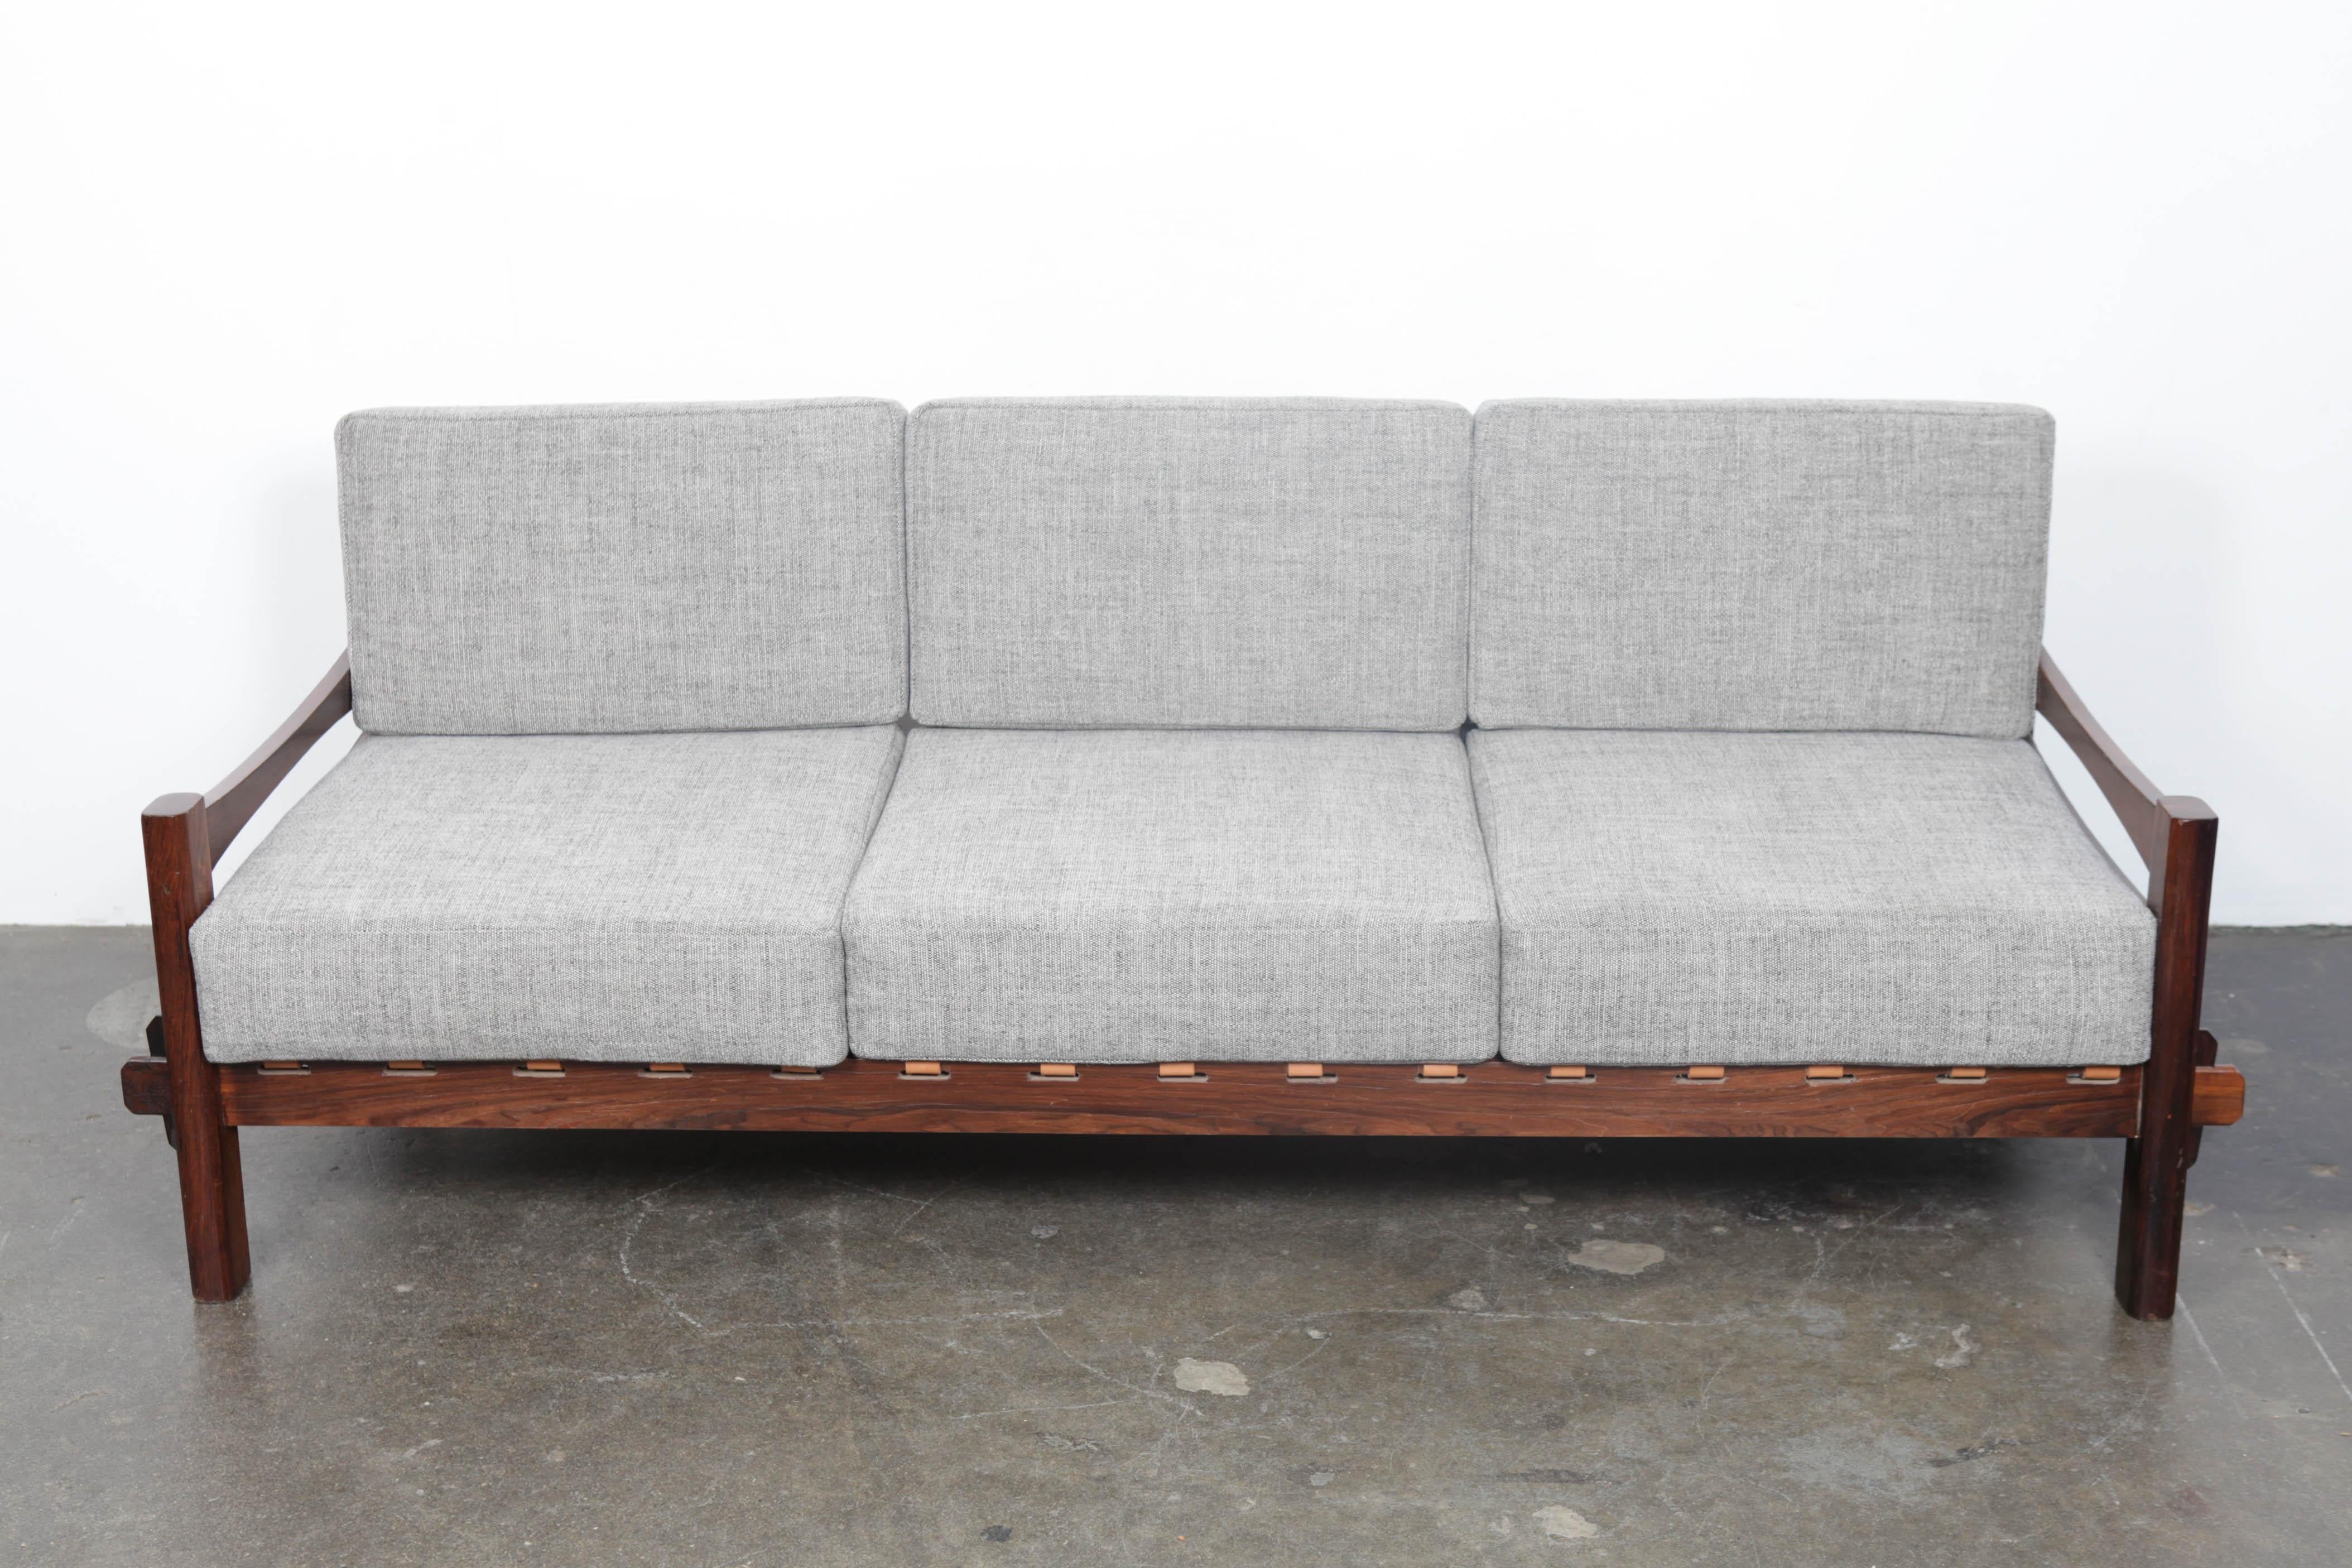 Unique solid rosewood 1960s Brazilian sofa with leather strapping and newly upholstered loose cushions in a light grey woven fabric. Designed unknown.